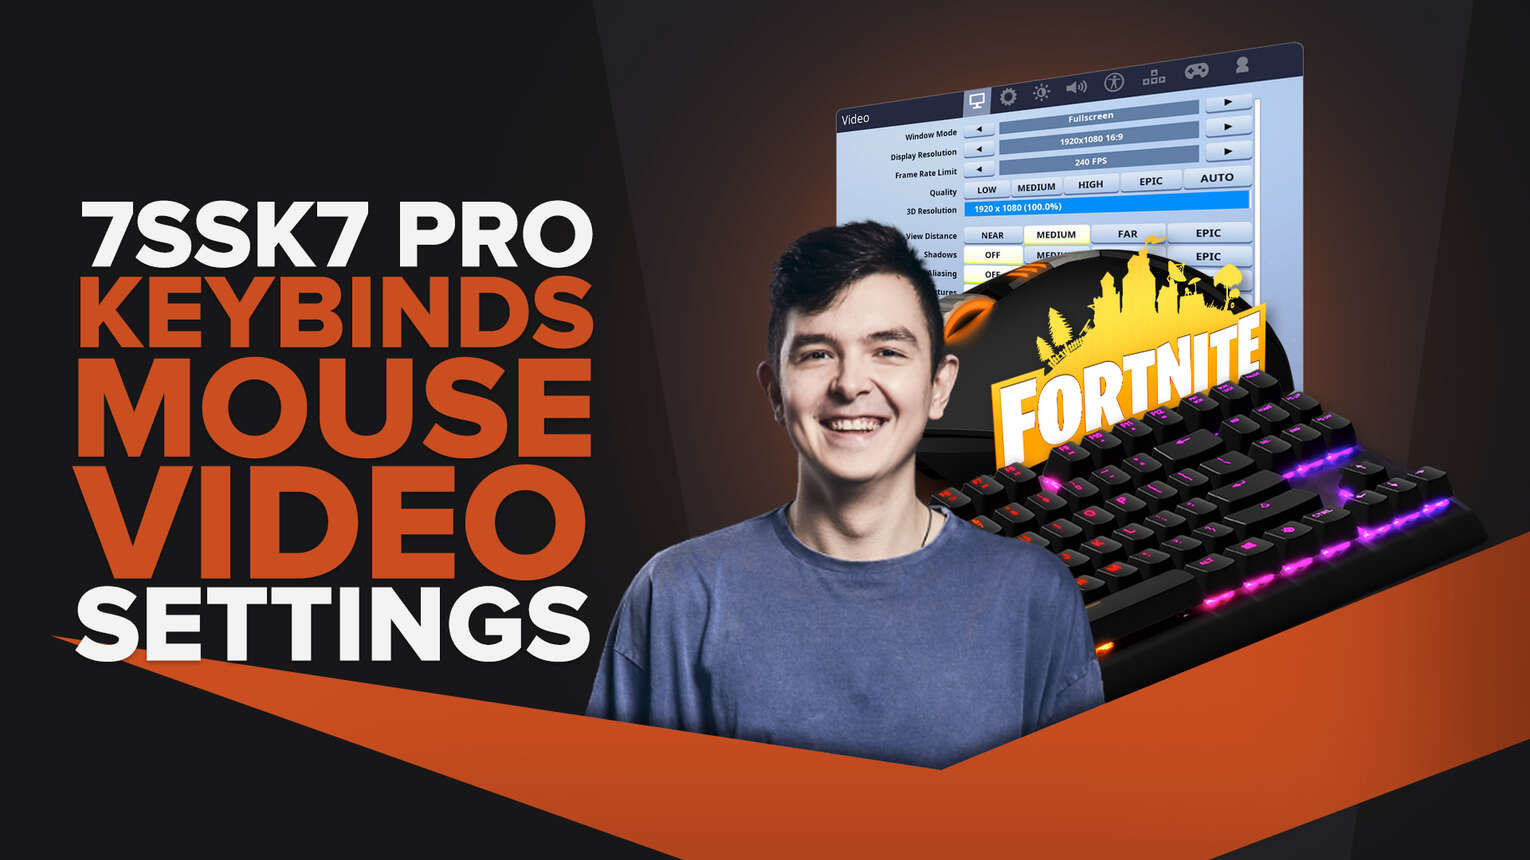 7ssk7’s | Keybinds, Mouse, Video Pro Fornite Settings